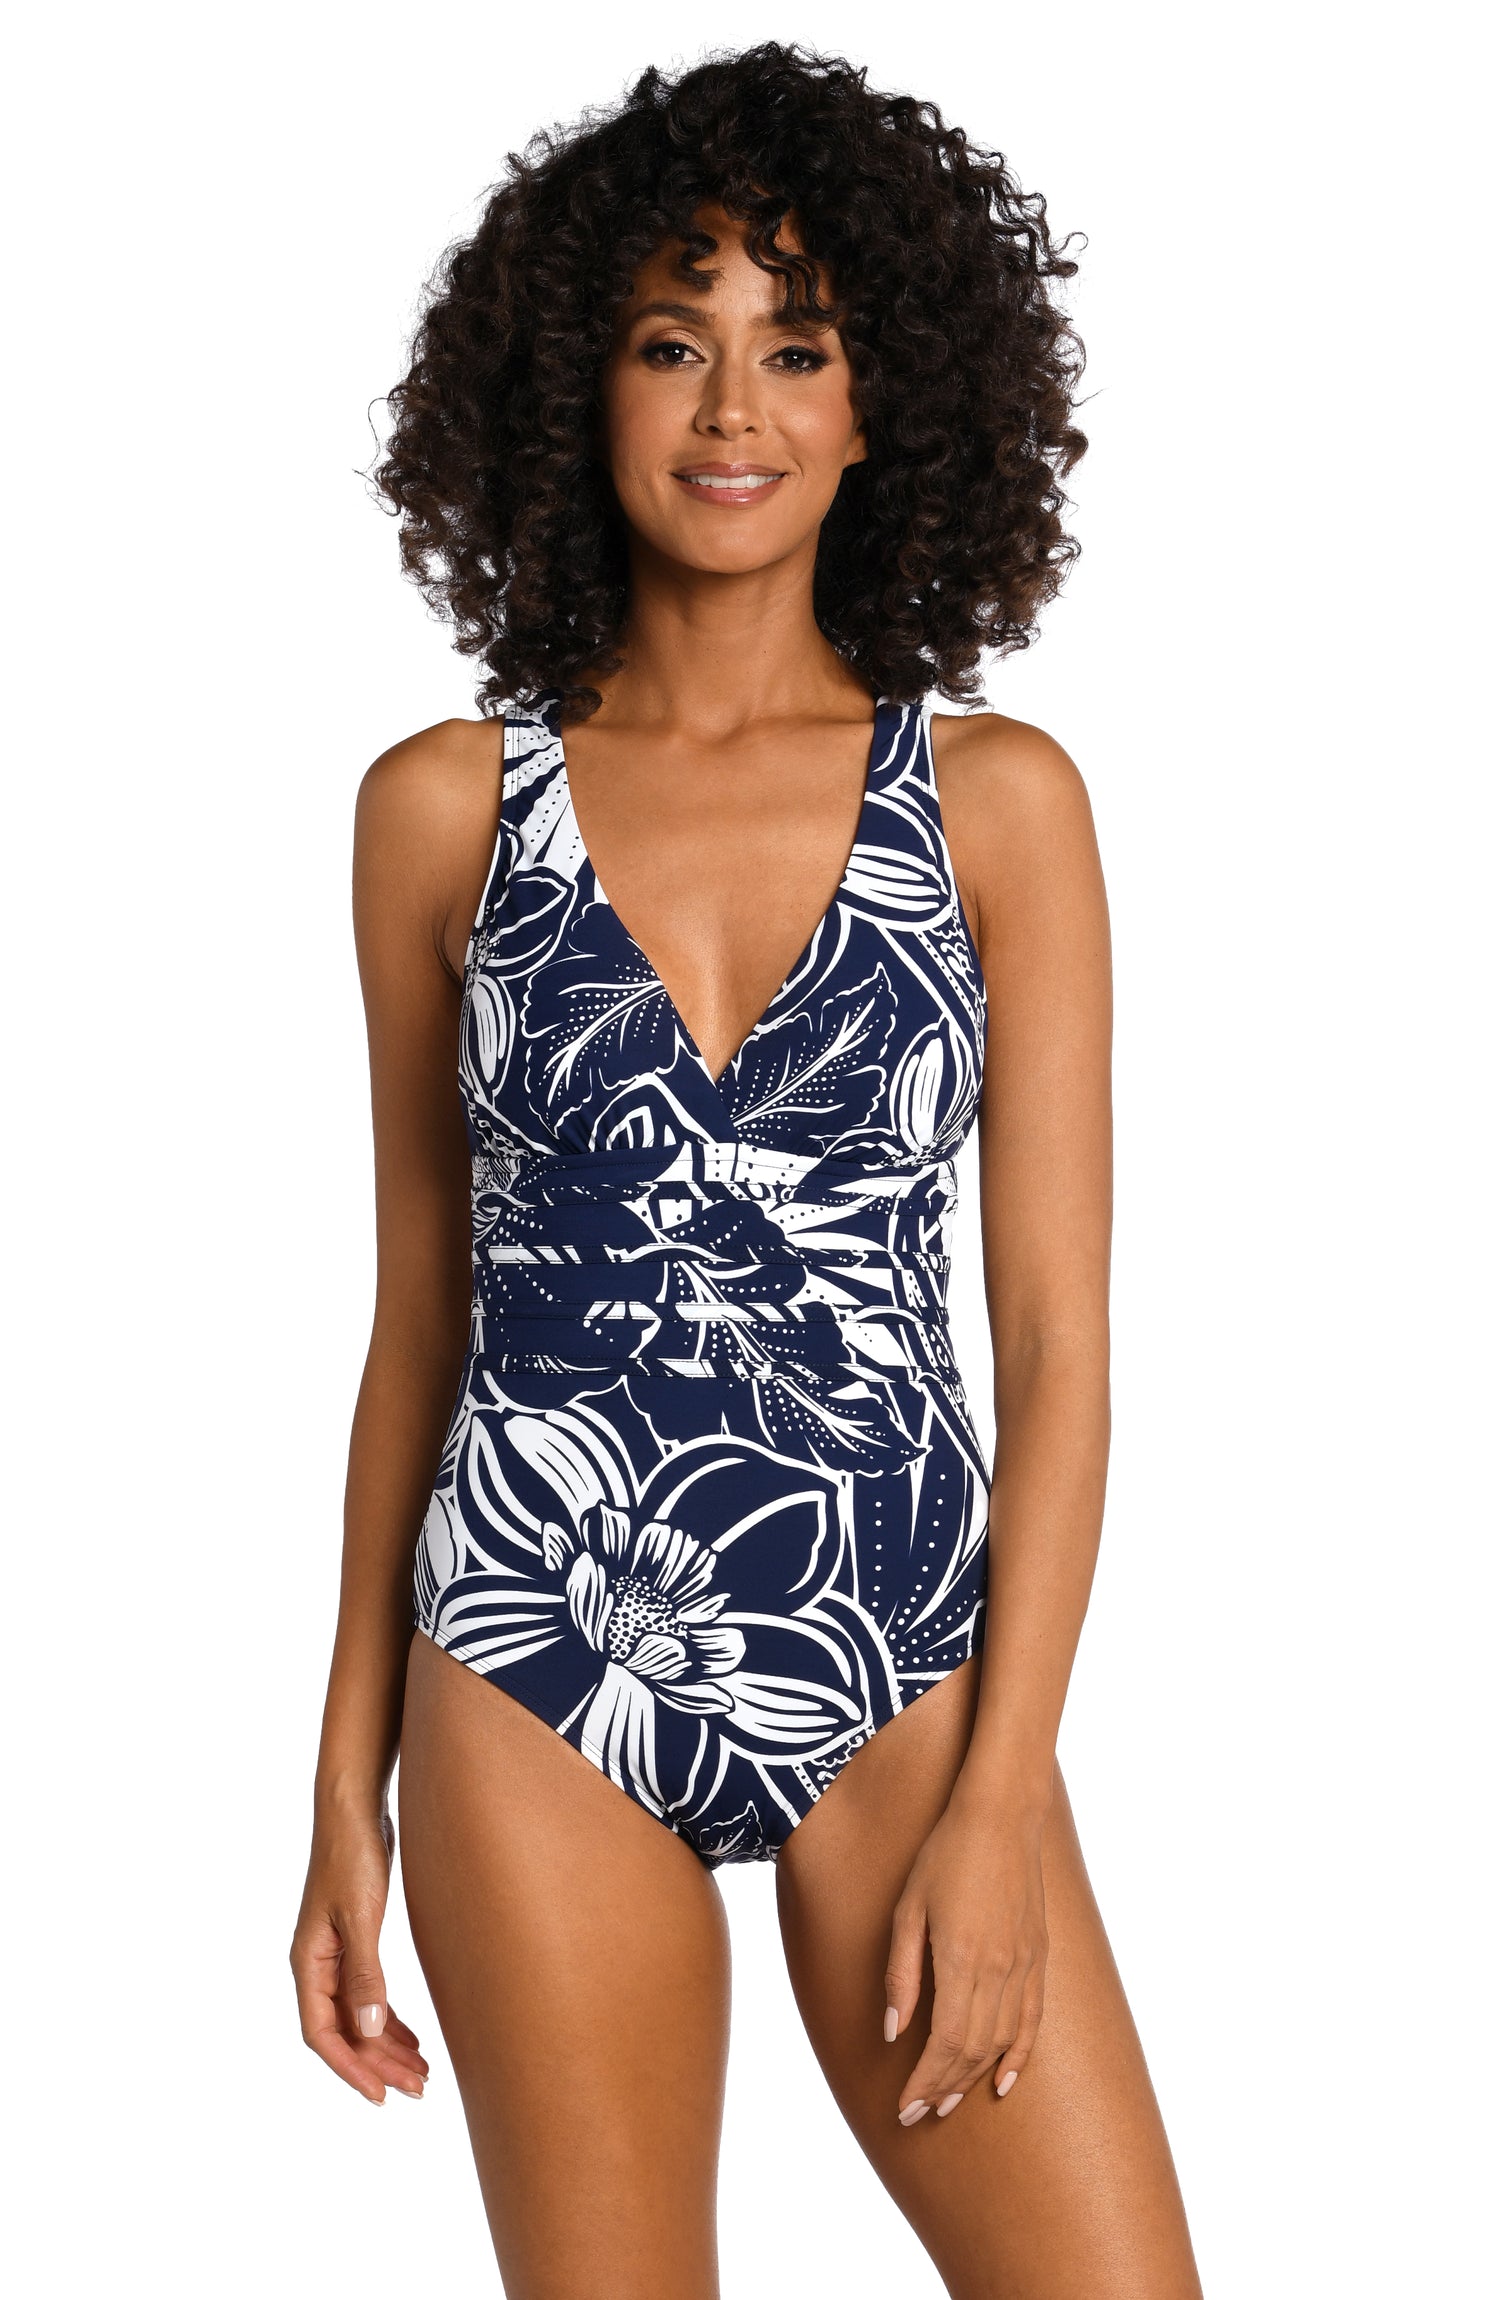 Model is wearing an indigo colored print with pops of white on this multi-strap crossback one piece from our At the Playa collection!